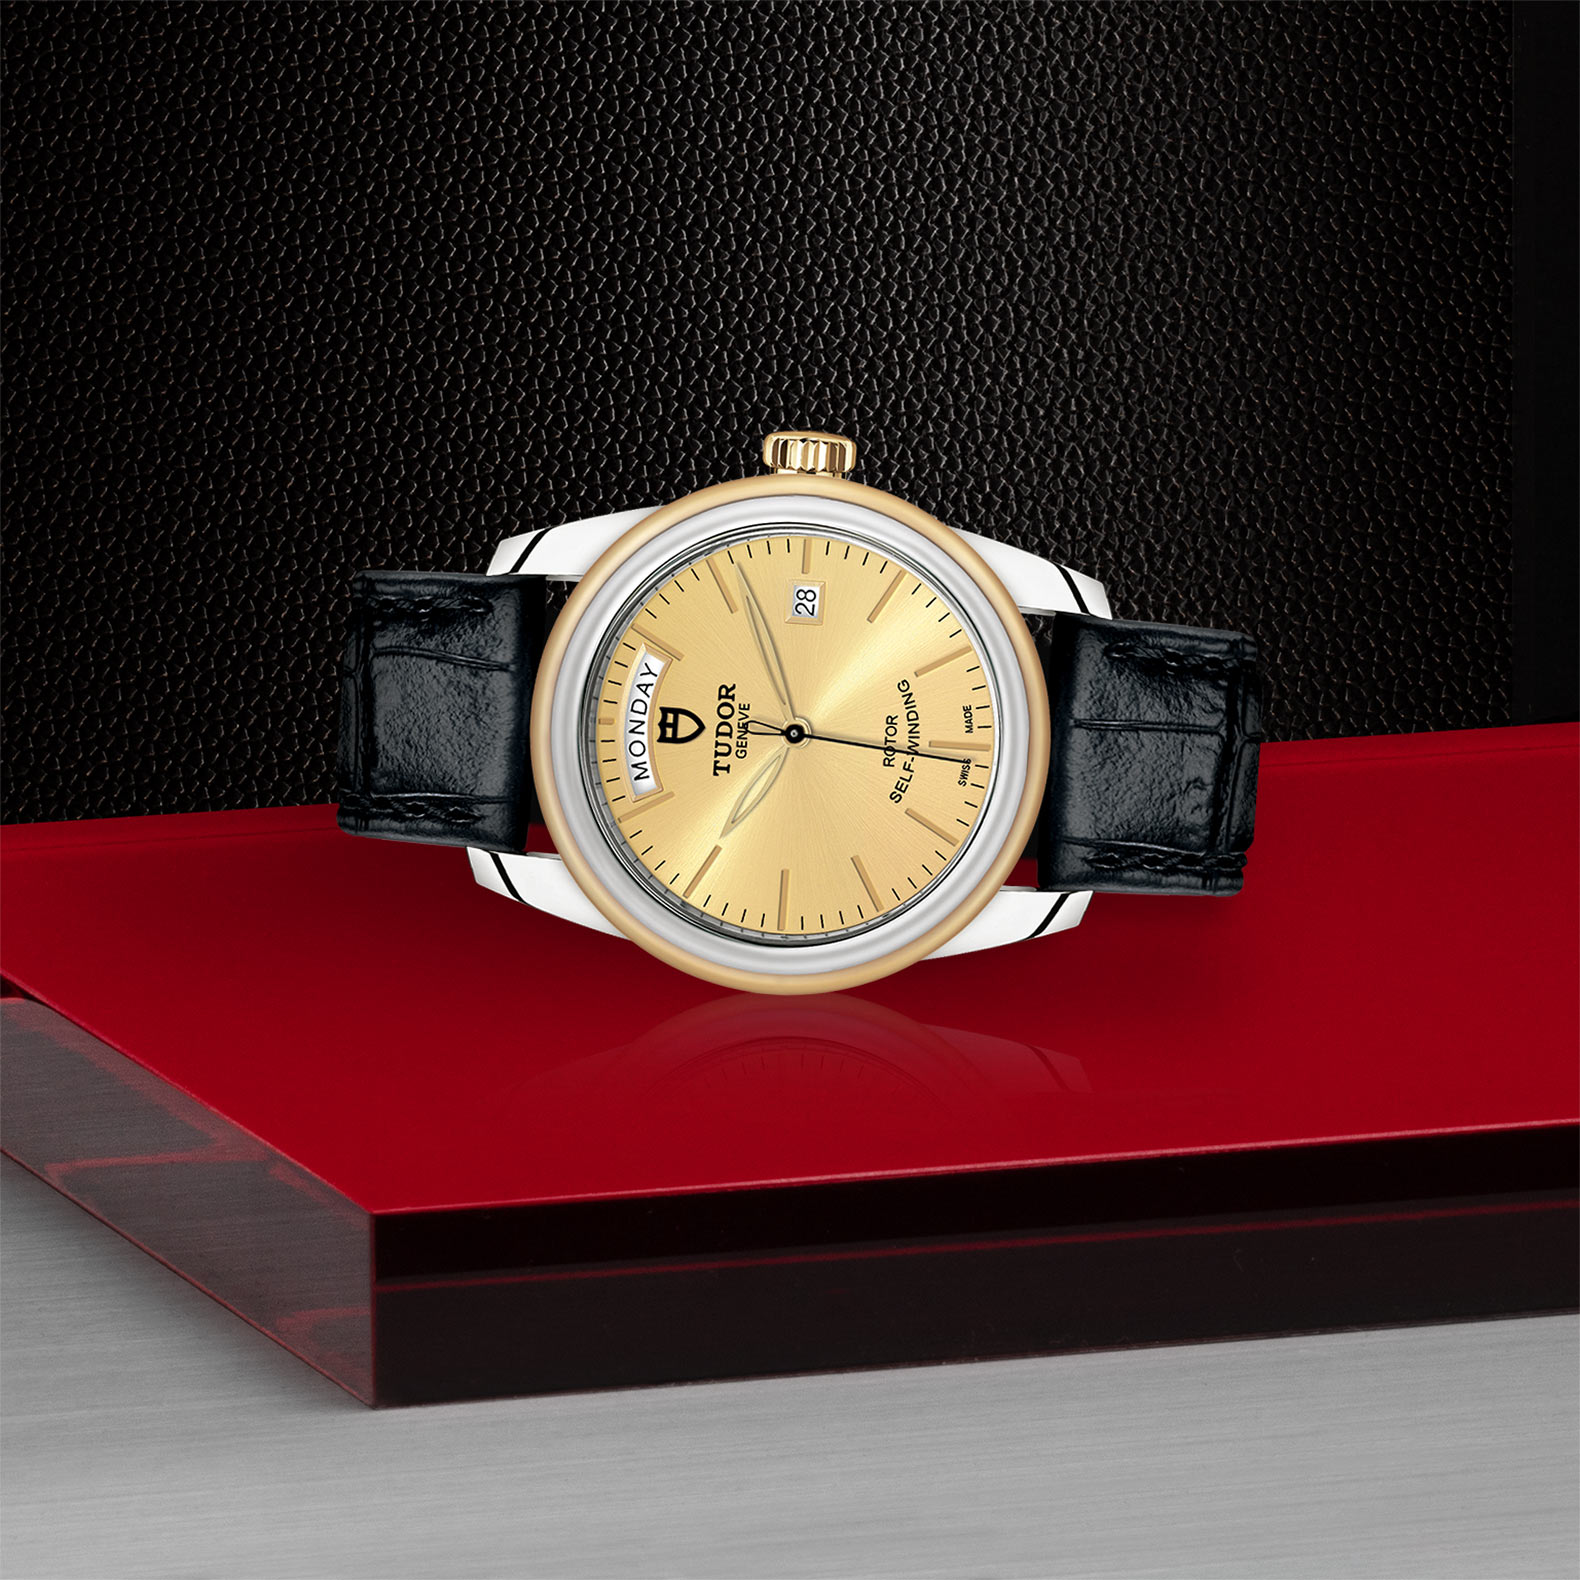 Tudor Glamour Date+Day M56003-0024